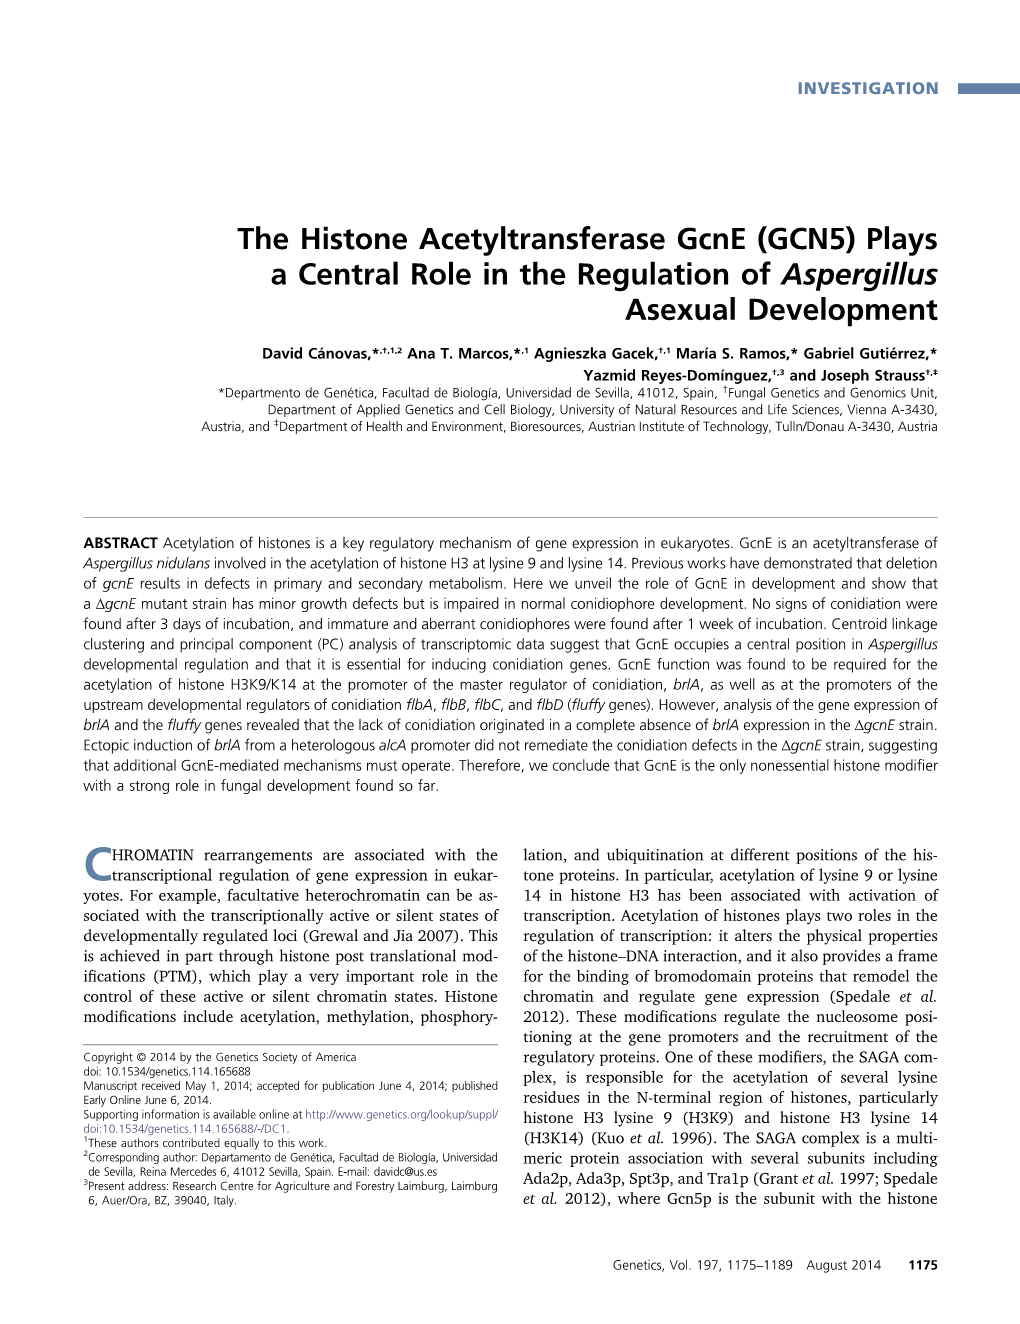 The Histone Acetyltransferase Gcne (GCN5) Plays a Central Role in the Regulation of Aspergillus Asexual Development